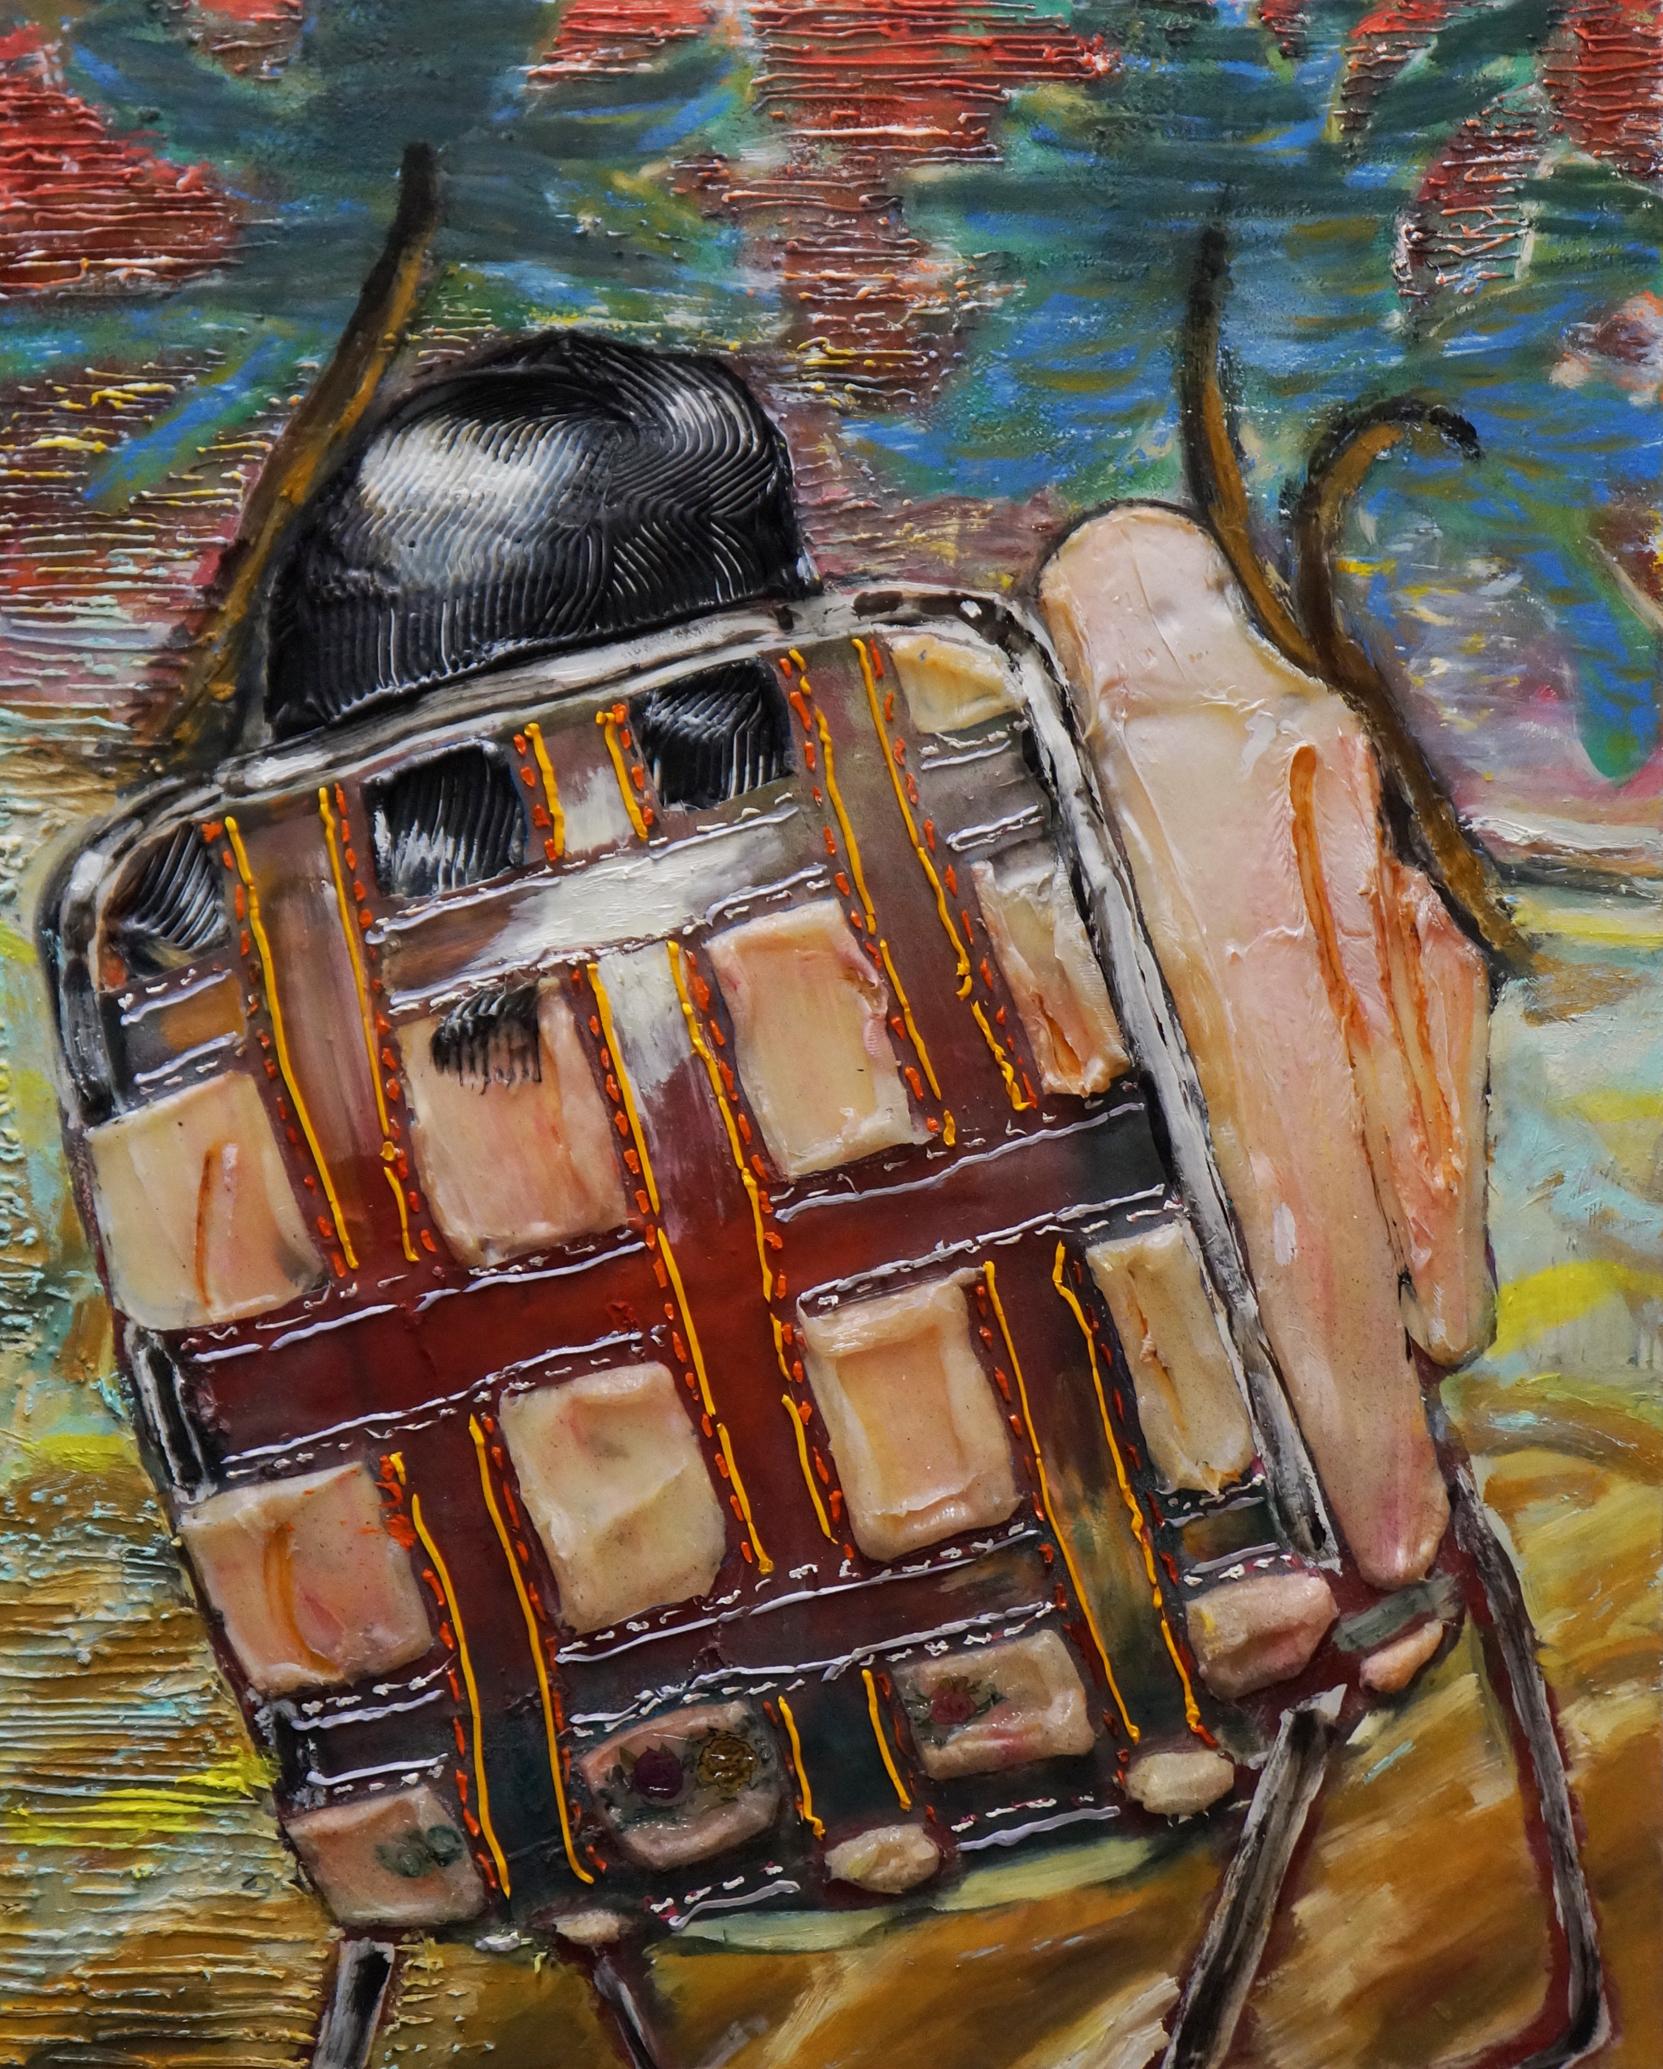 LAWN CHAIR ON THE BEACH - Textural Figure Painting with oil, enamel and silicone